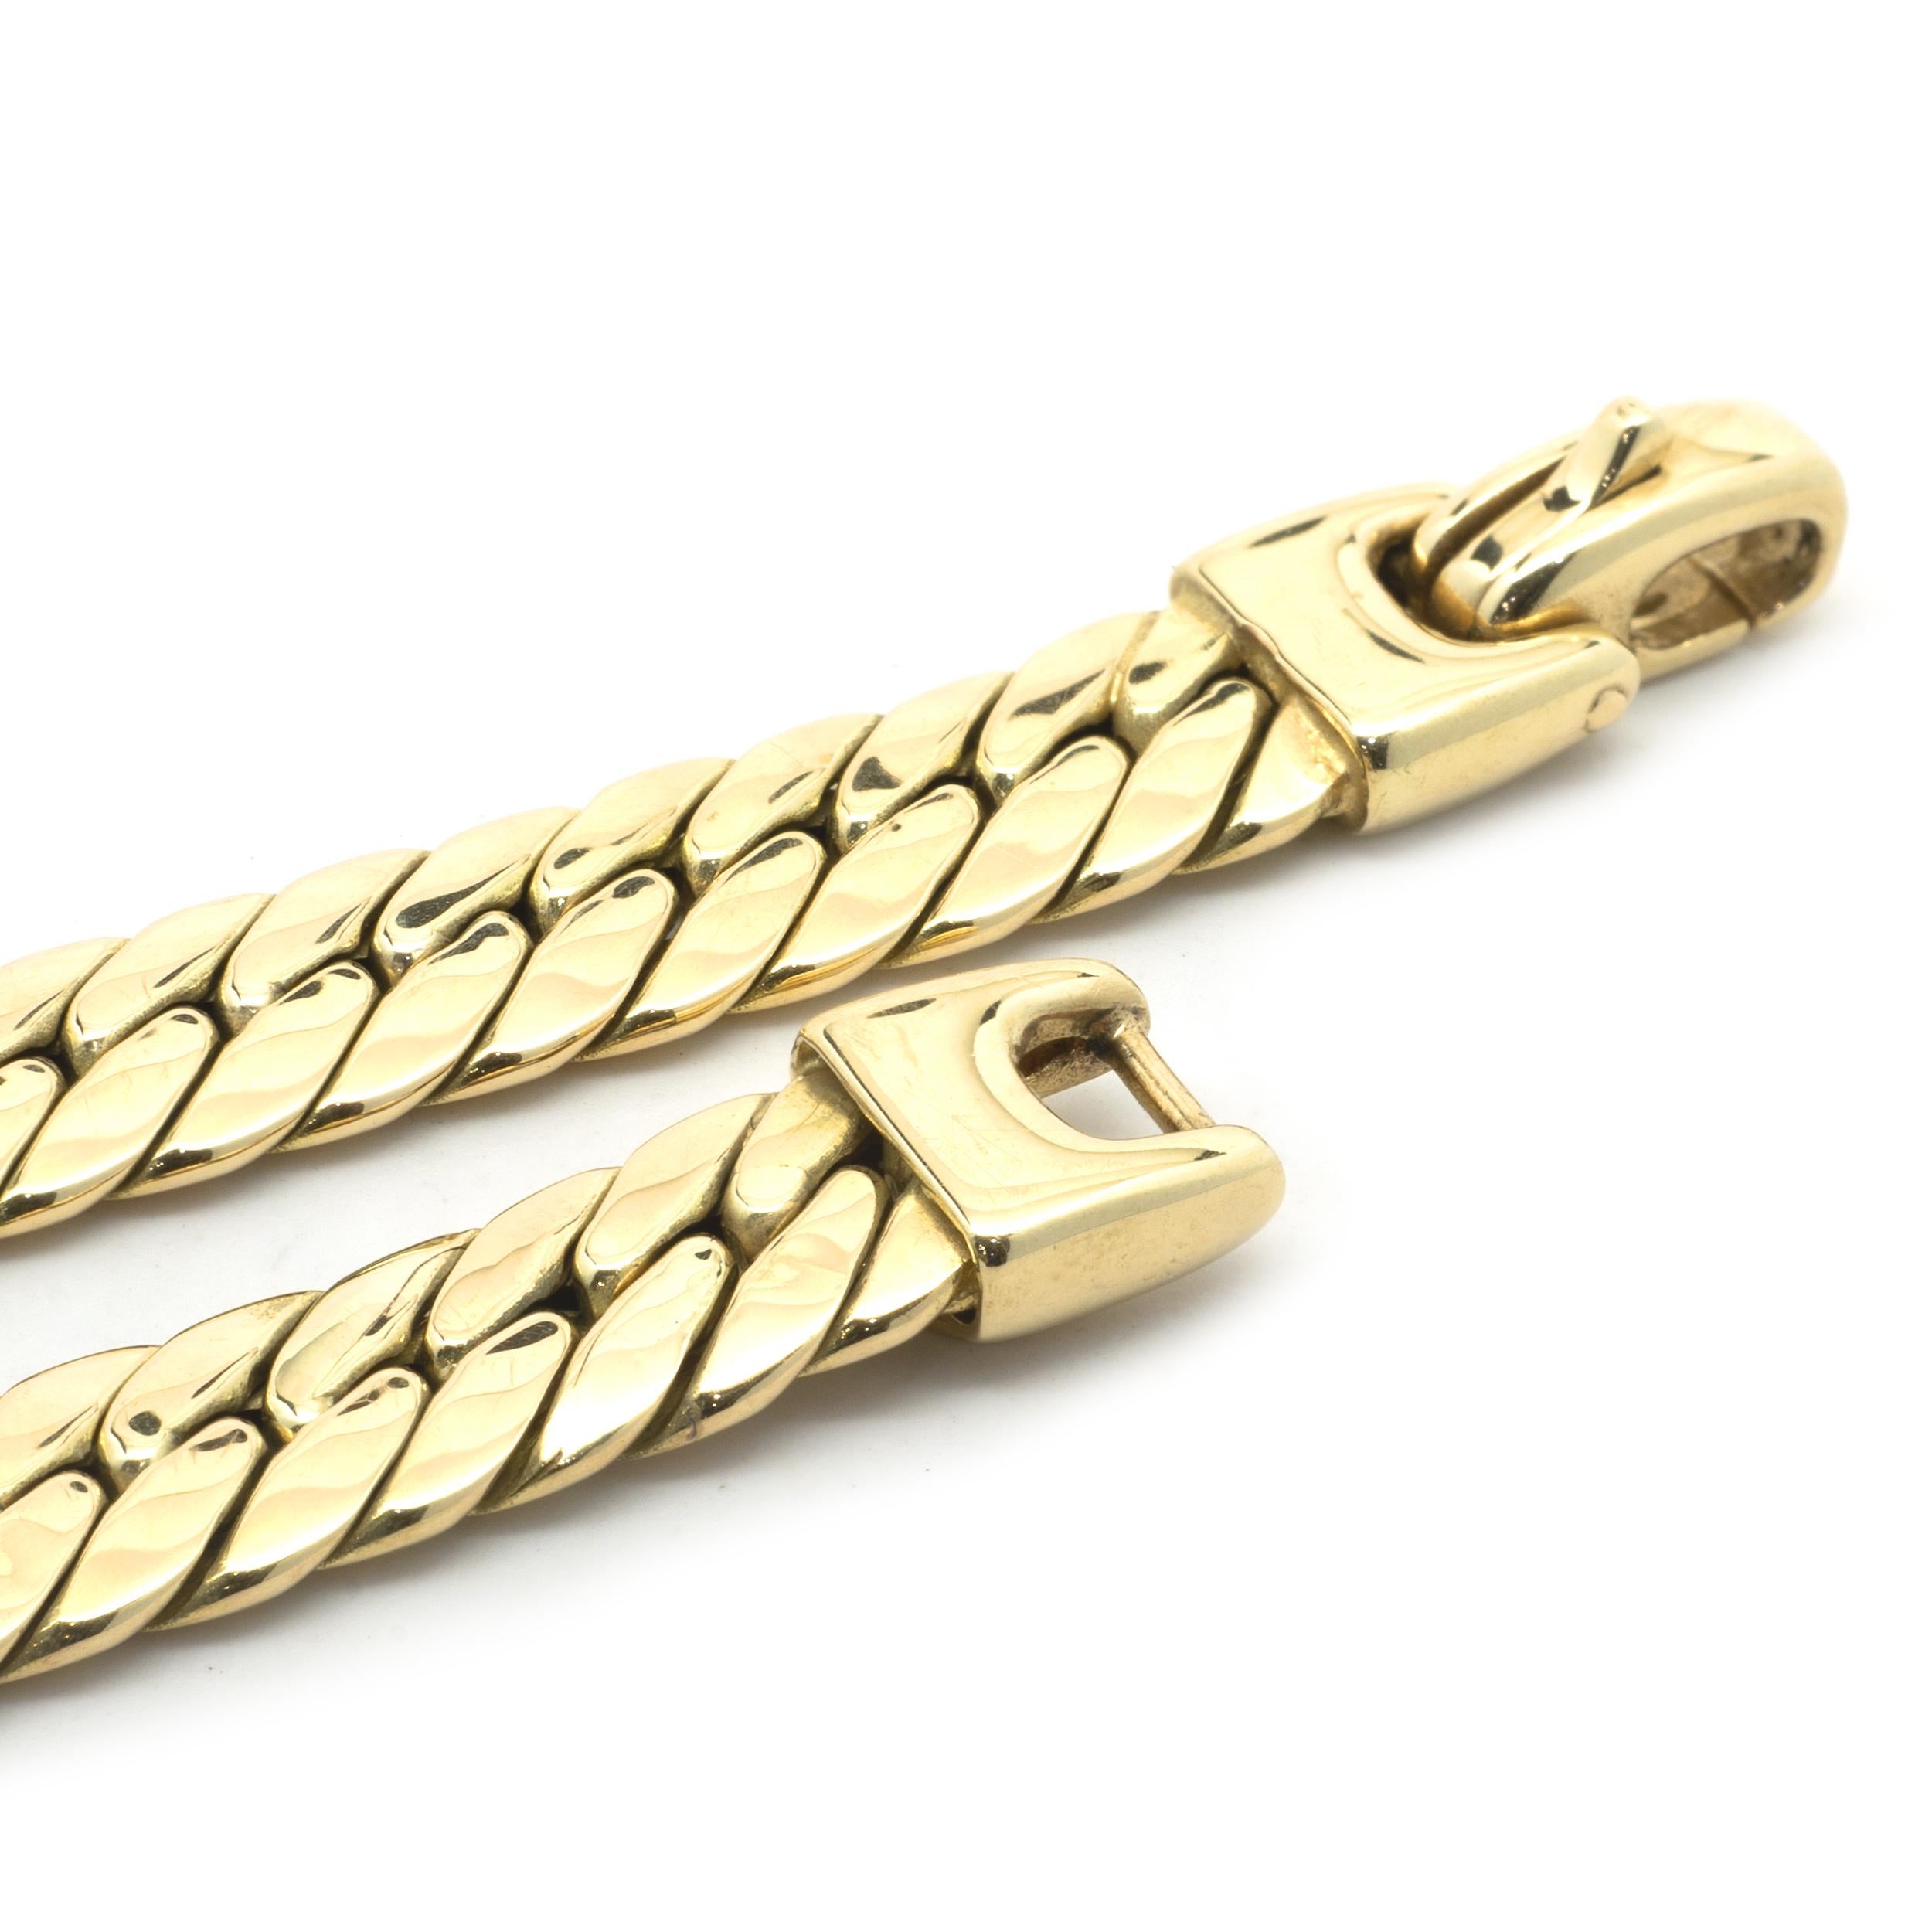 Material: 14K yellow gold
Dimensions: necklace measures 17-inches in length, 6.5mm wide
Weight: 13.91 grams
